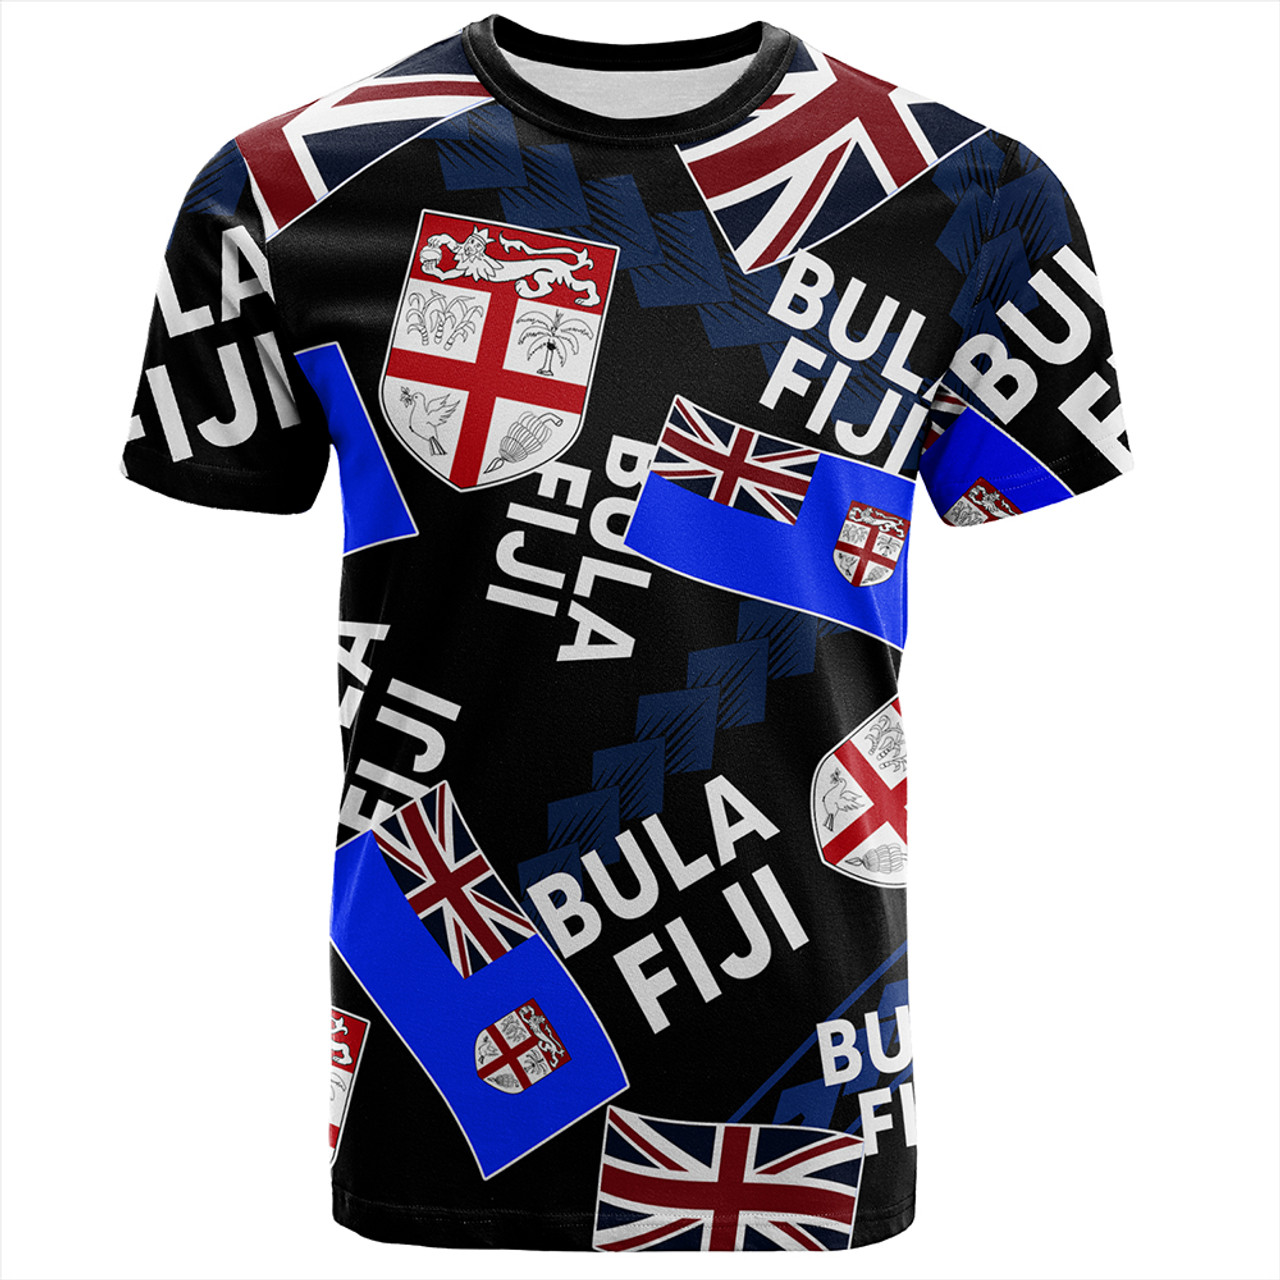 Fiji T-Shirt Flag Outfit Free Style